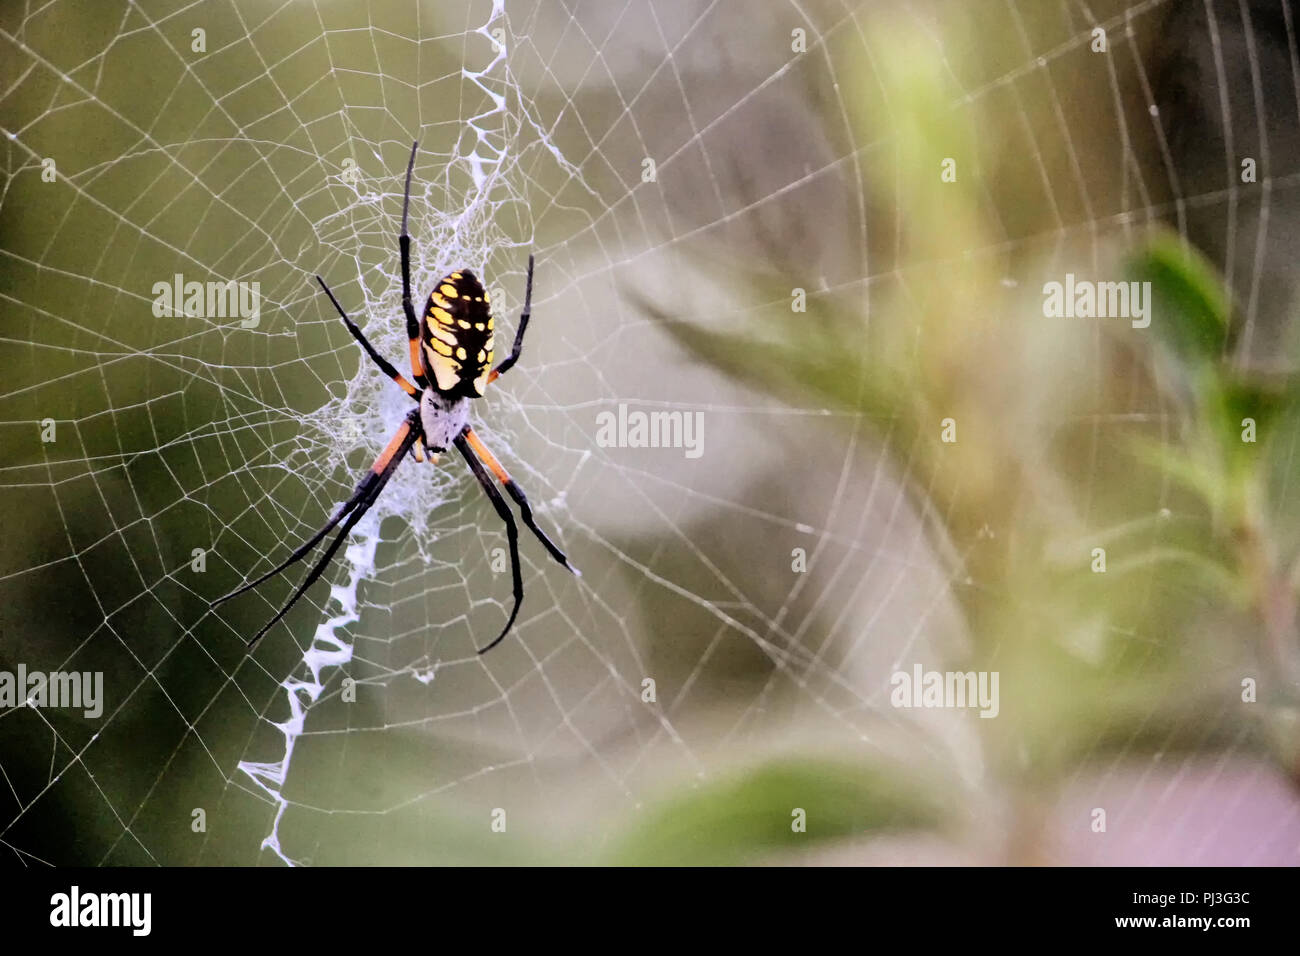 A yellow and black orb weaver garden spider sits in the center of her web against a blurred background. Stock Photo